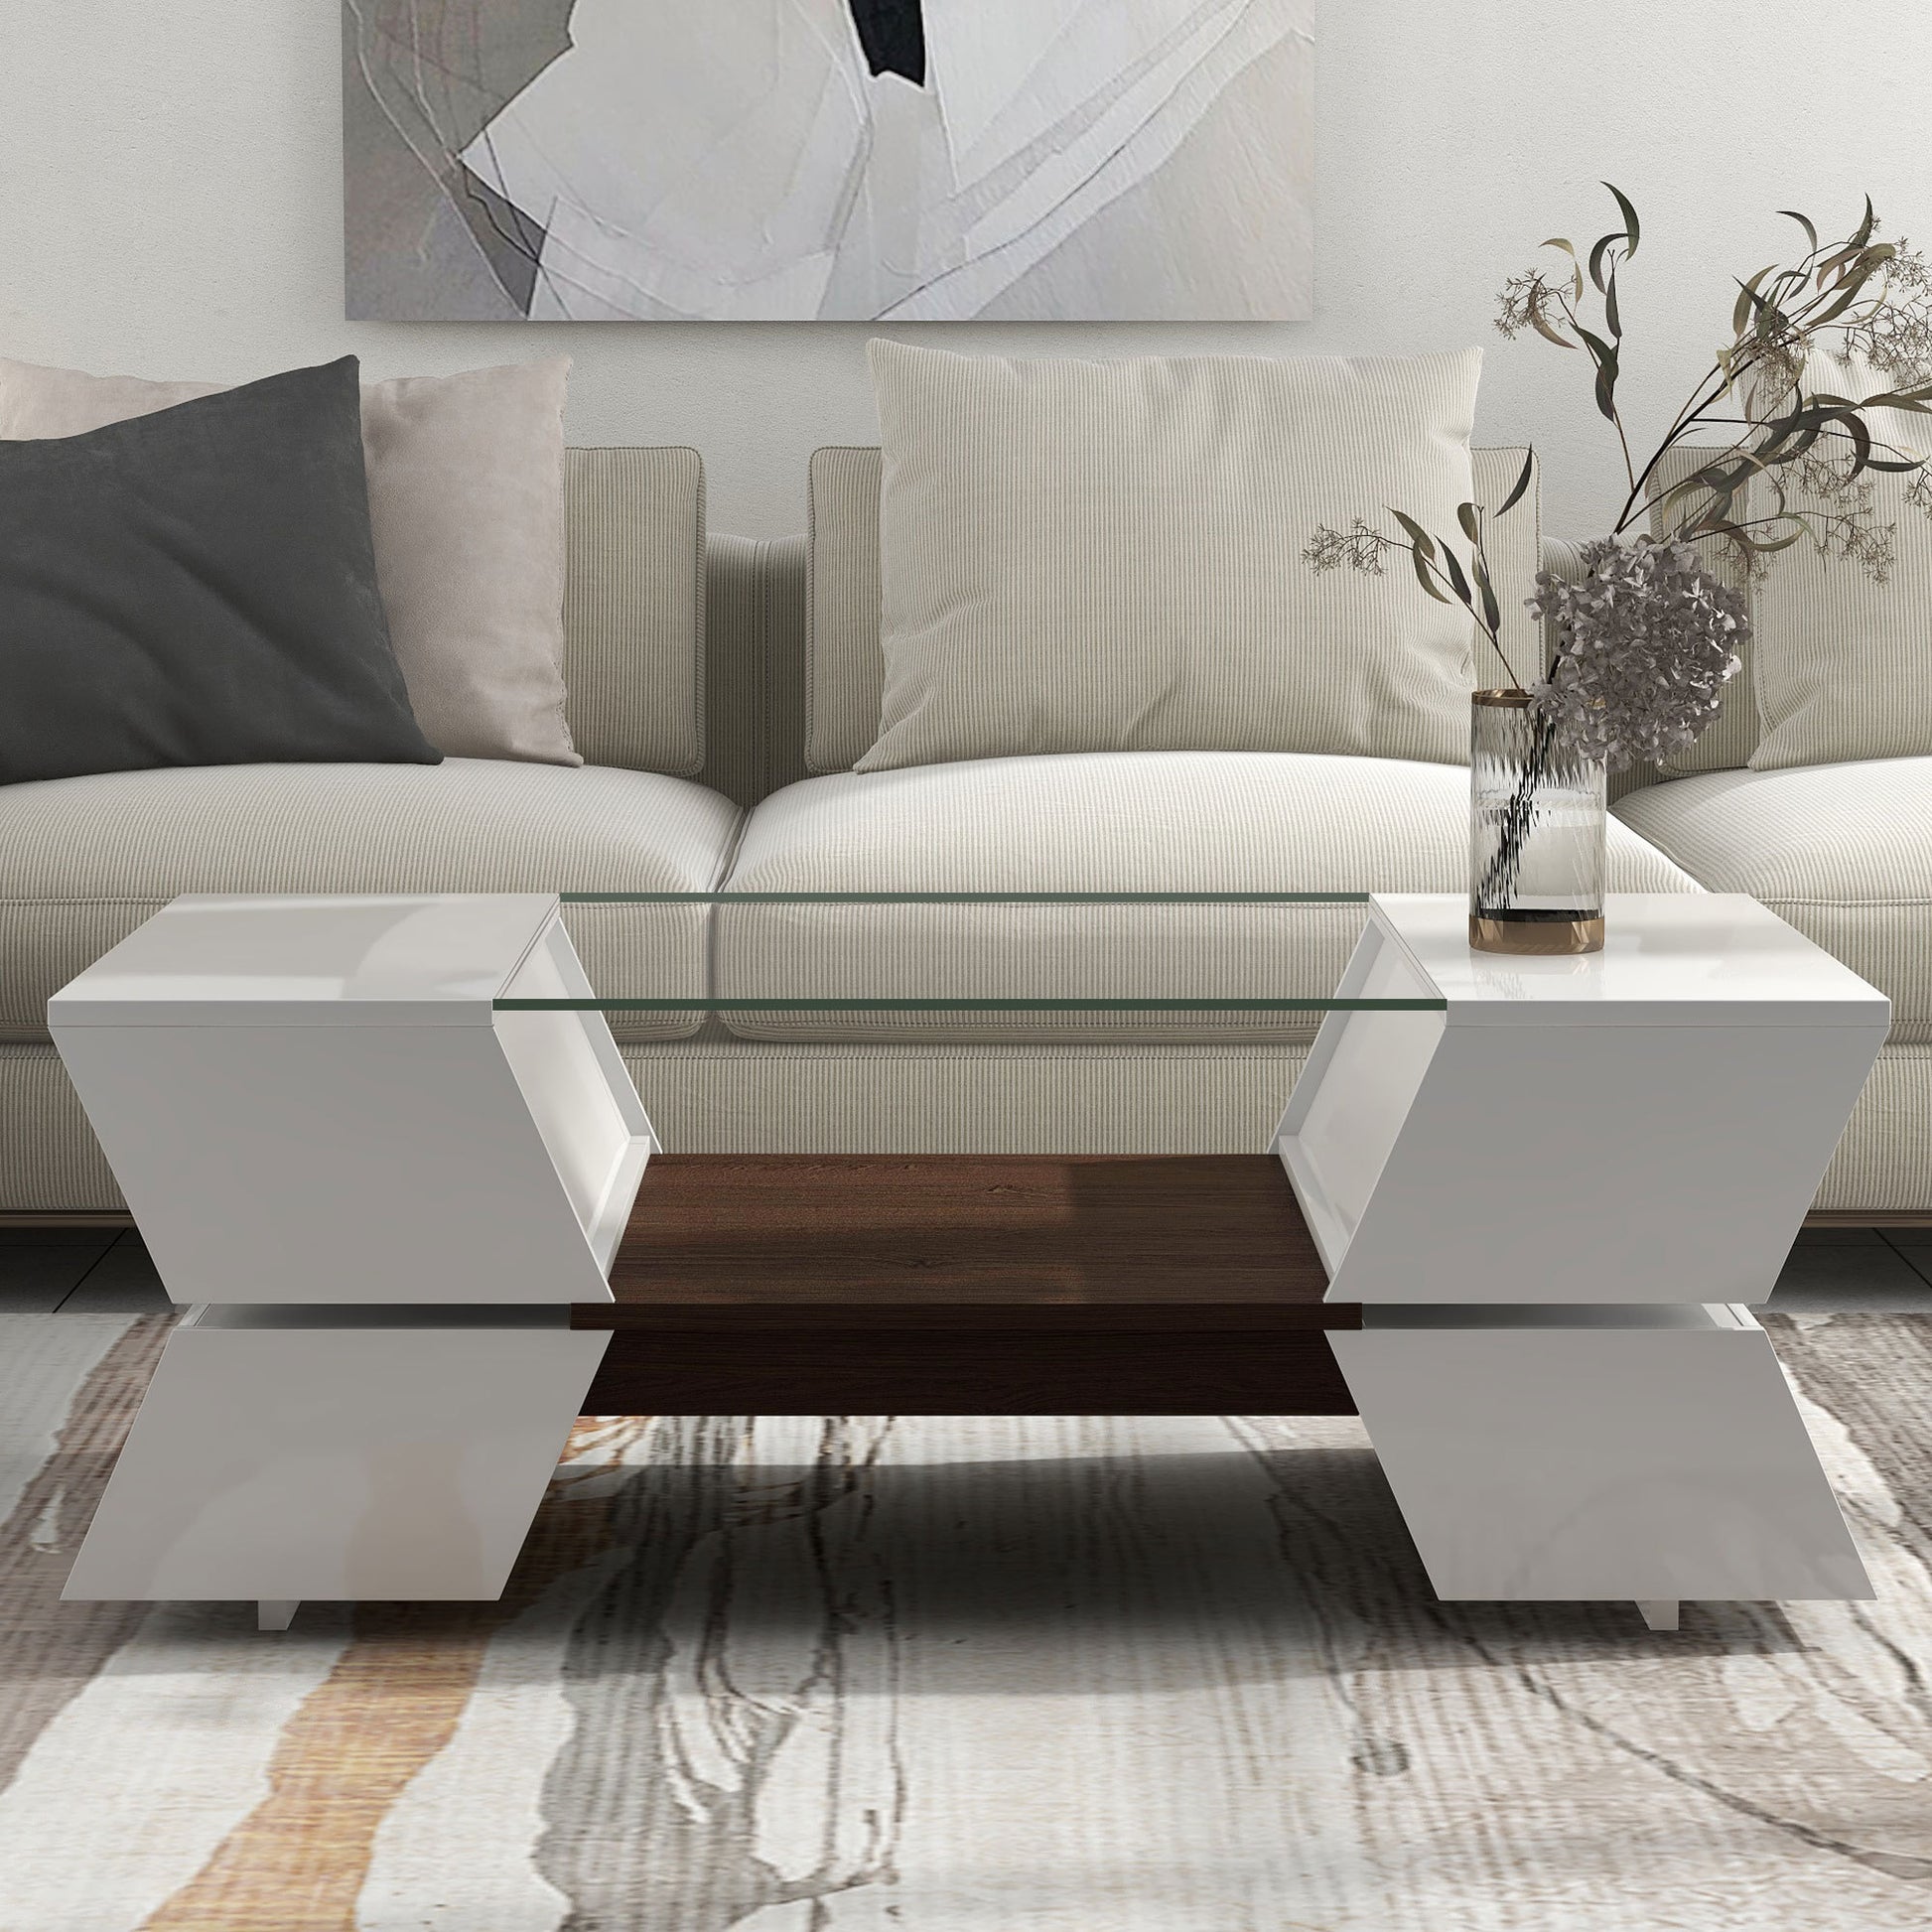 ON-TREND 6mm Glass-Top Coffee Table with Open Shelves and Cabinets, Geometric Style Cocktail Table with Great Storage Capacity, Modernist 2-Tier Center Table for Living Room, White - Enova Luxe Home Store